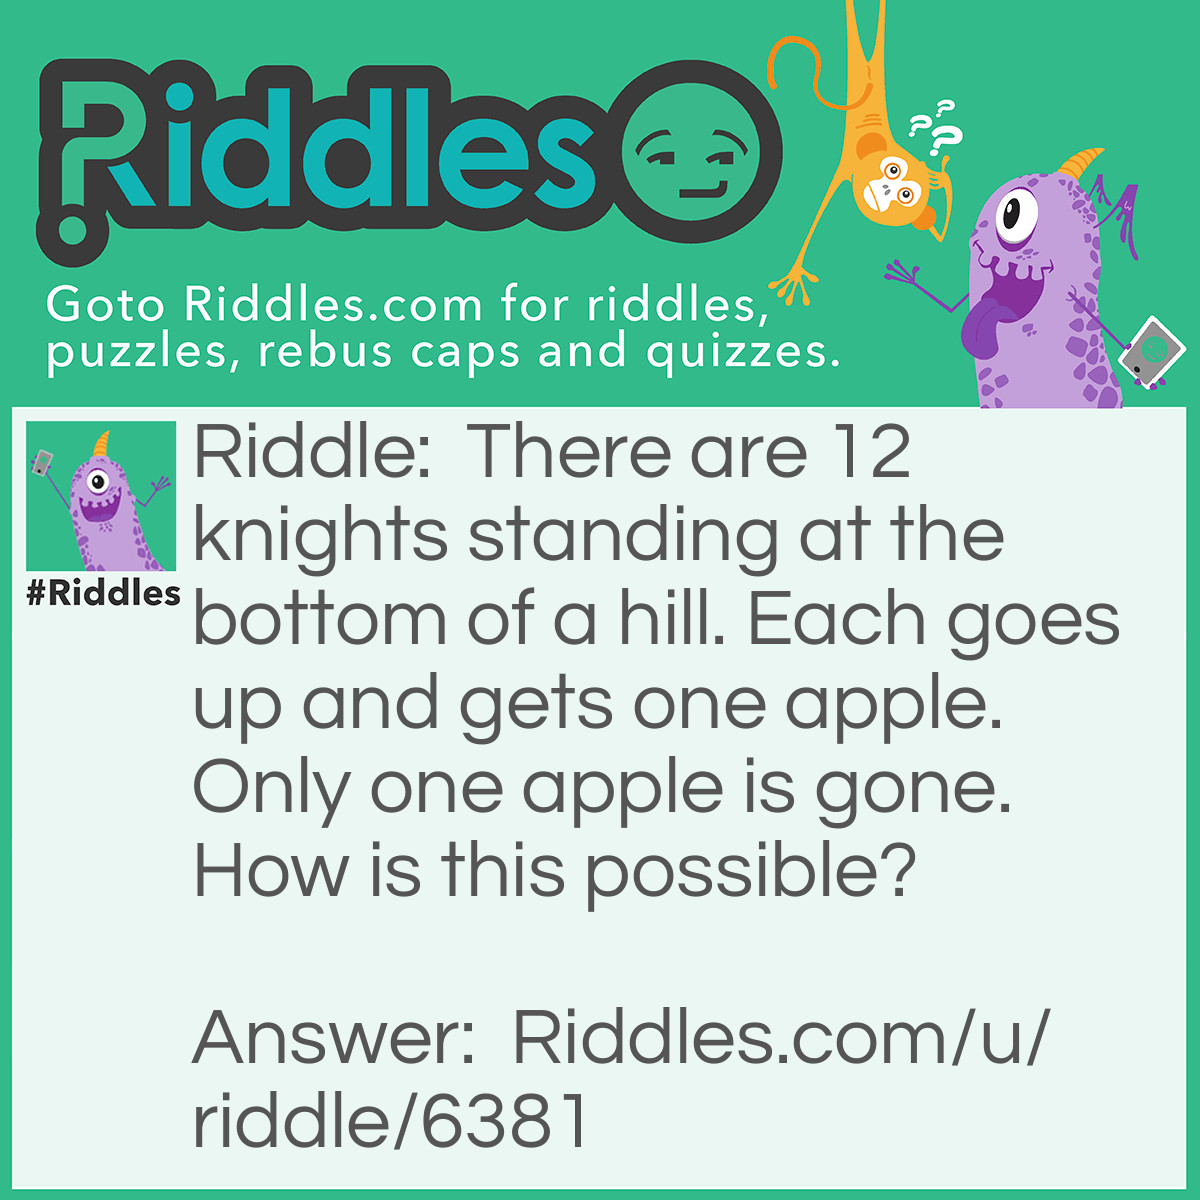 Riddle: There are 12 knights standing at the bottom of a hill. Each goes up and gets one apple. Only one apple is gone. How is this possible? Answer: Each is one of the knights name.